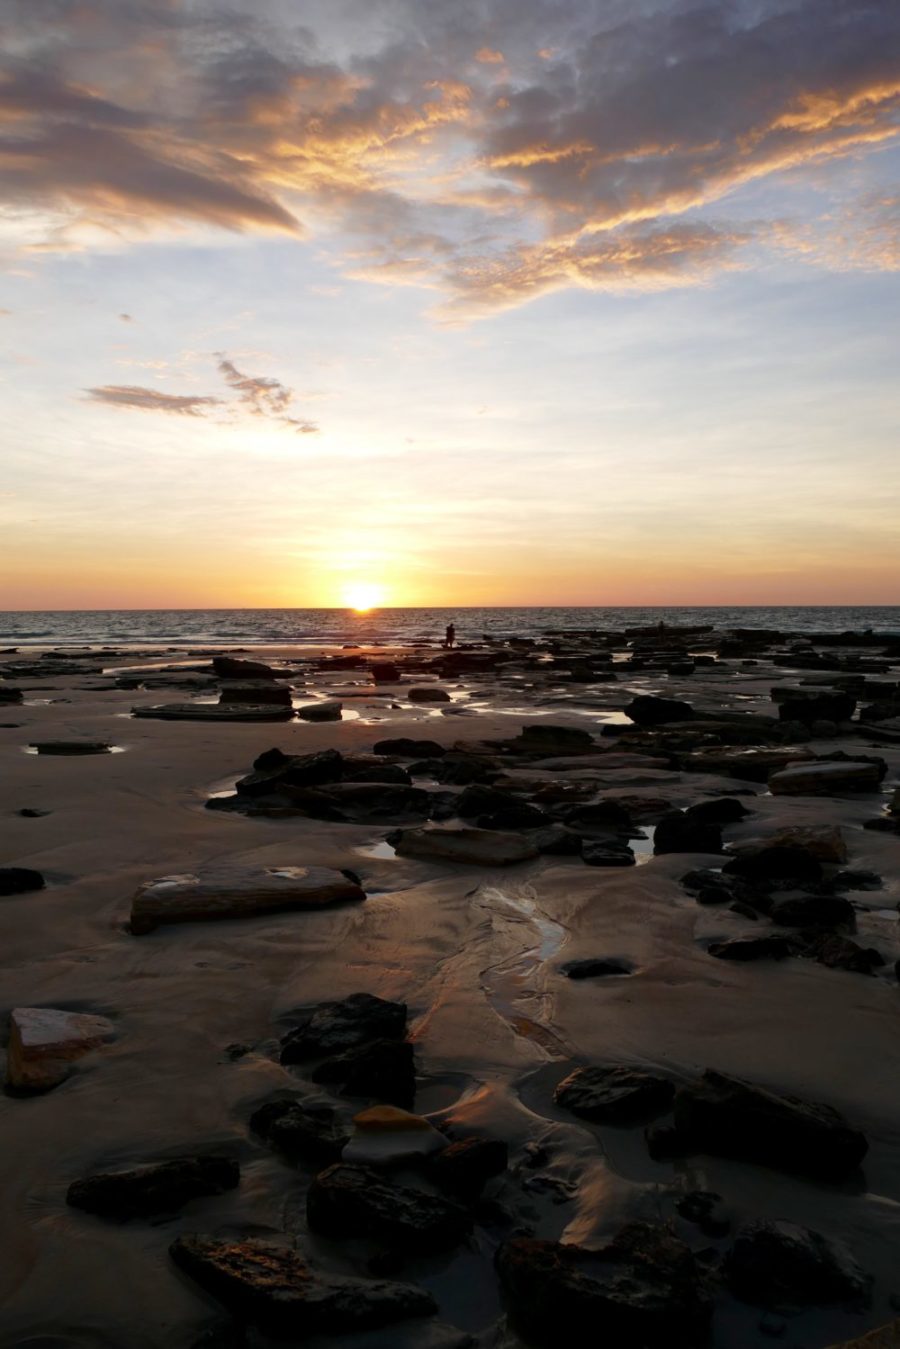 Sunset, low tide, Cable Beach, Broome. All photos copyright Doug Spencer.